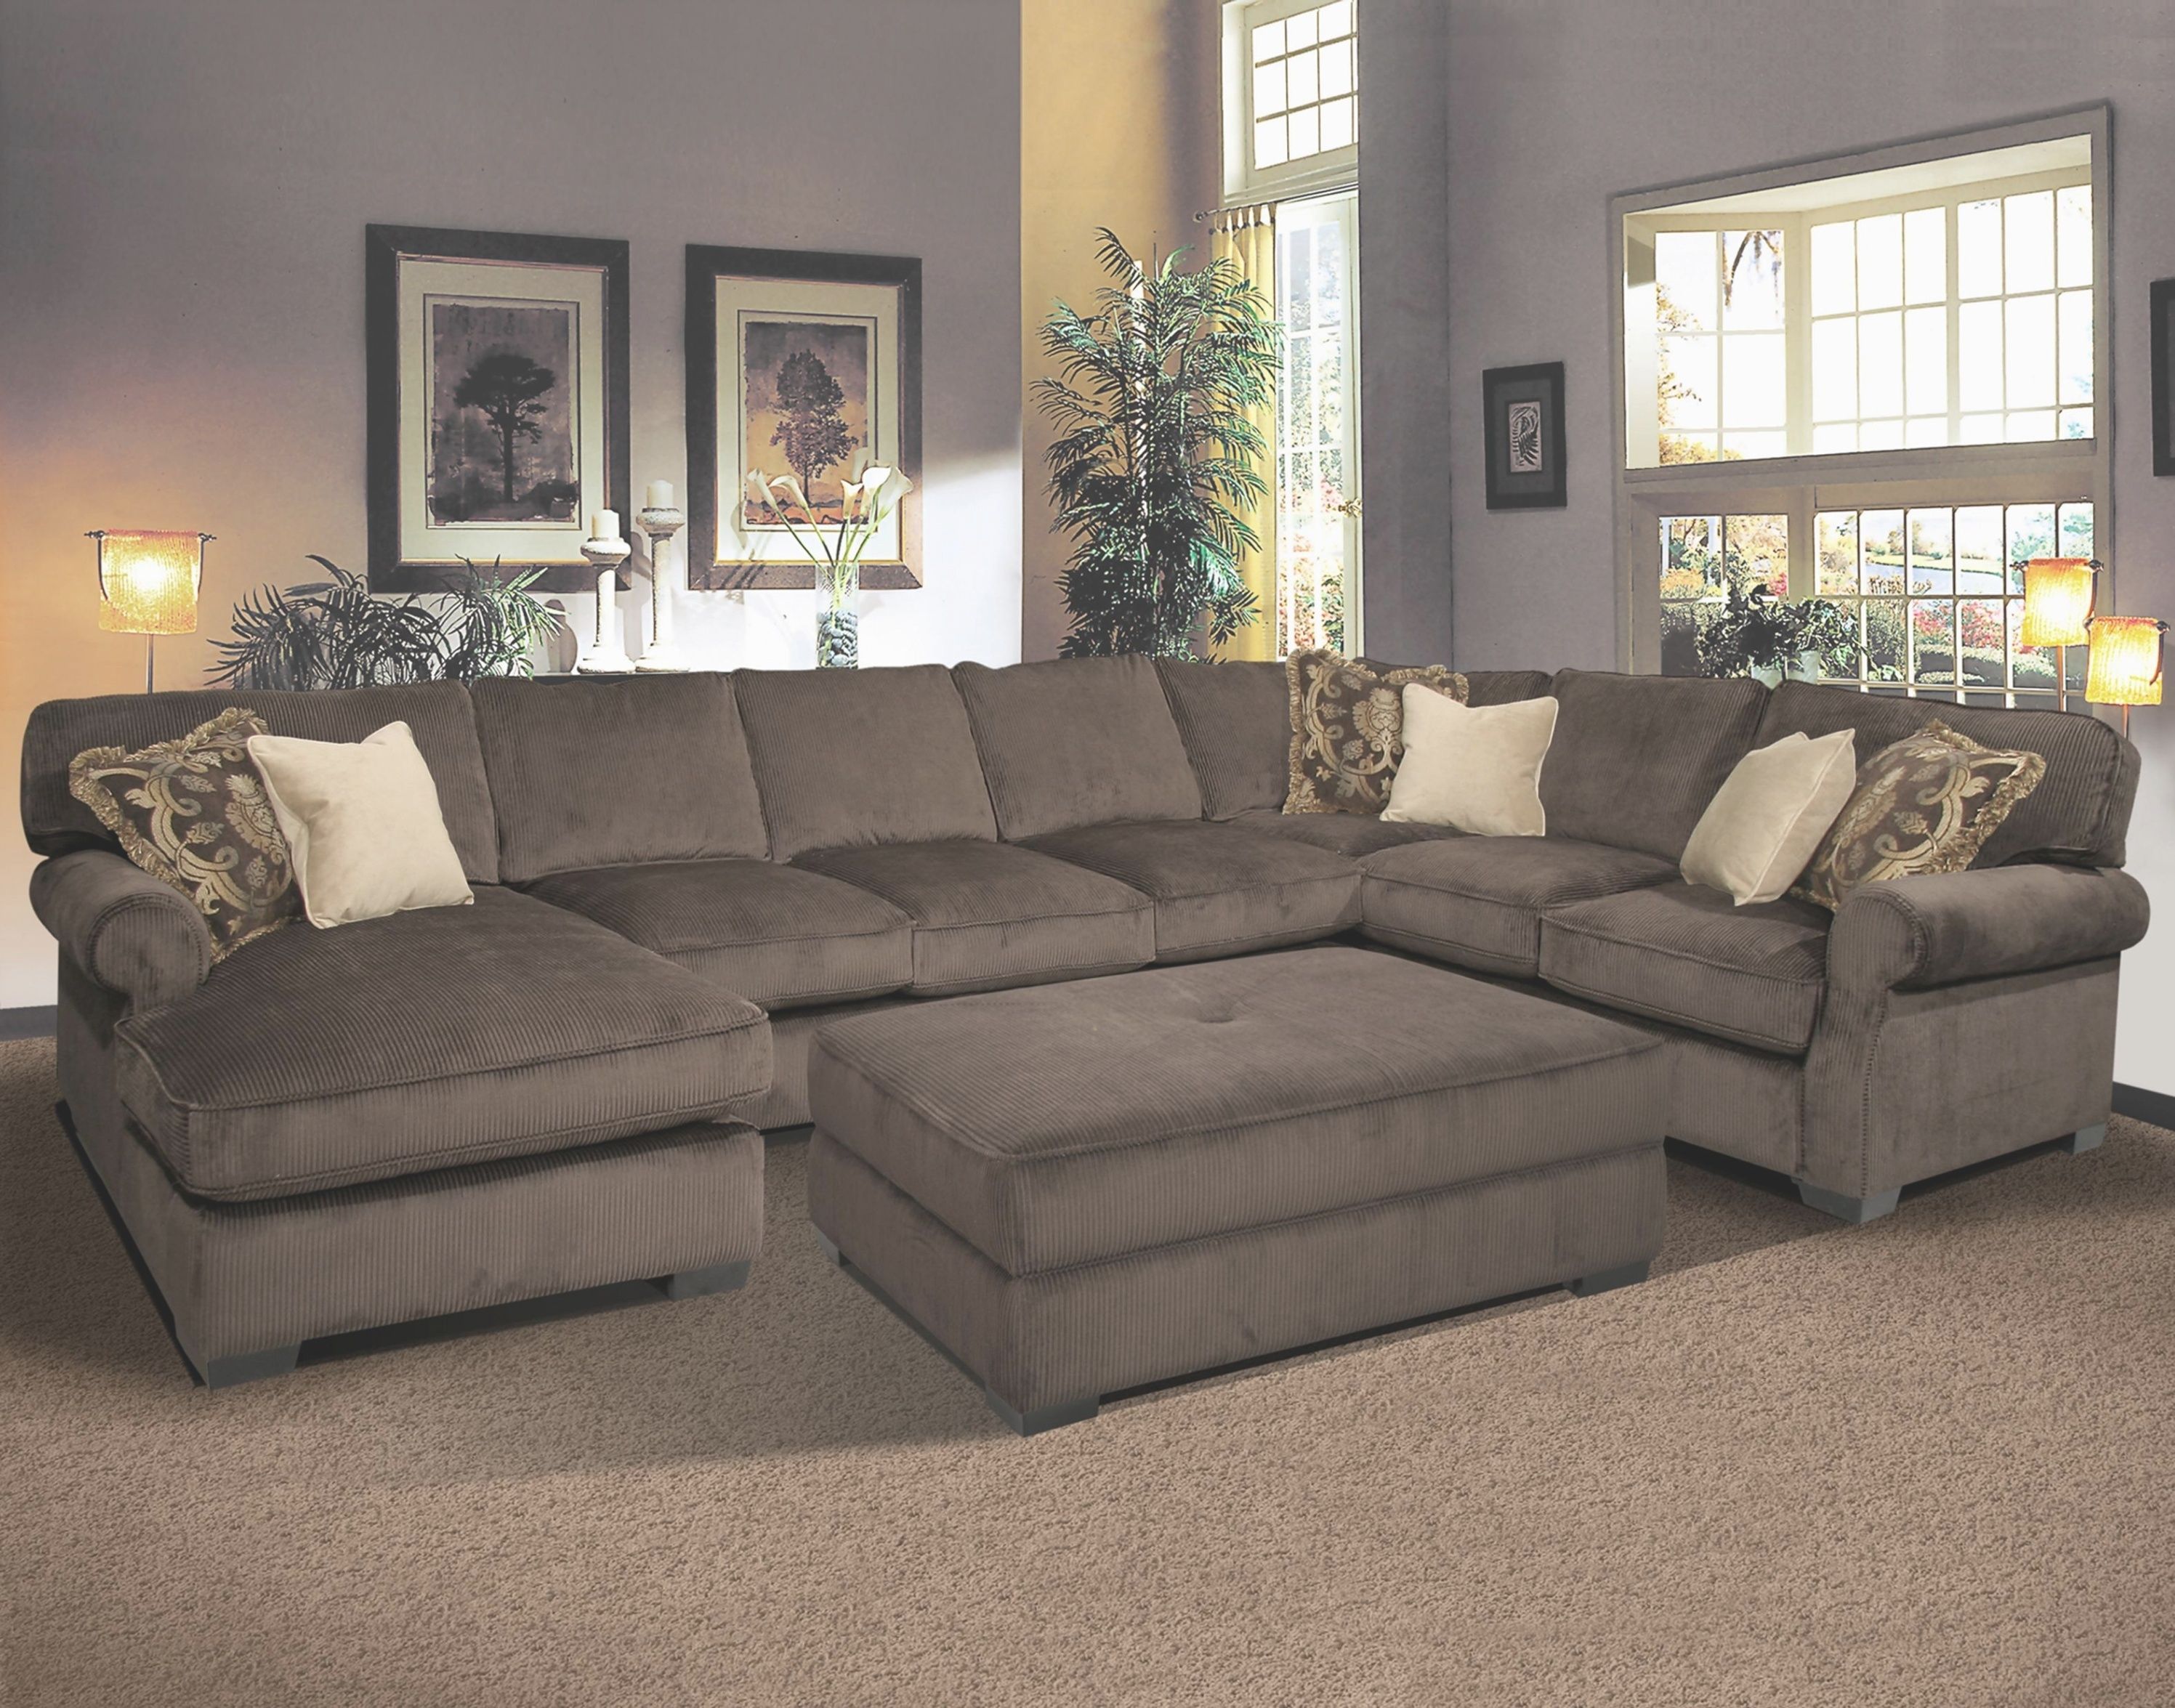 Extra Wide Sofa Bed Best Home Furniture Ideas Regarding Extra Wide Sectional Sofas (View 11 of 15)